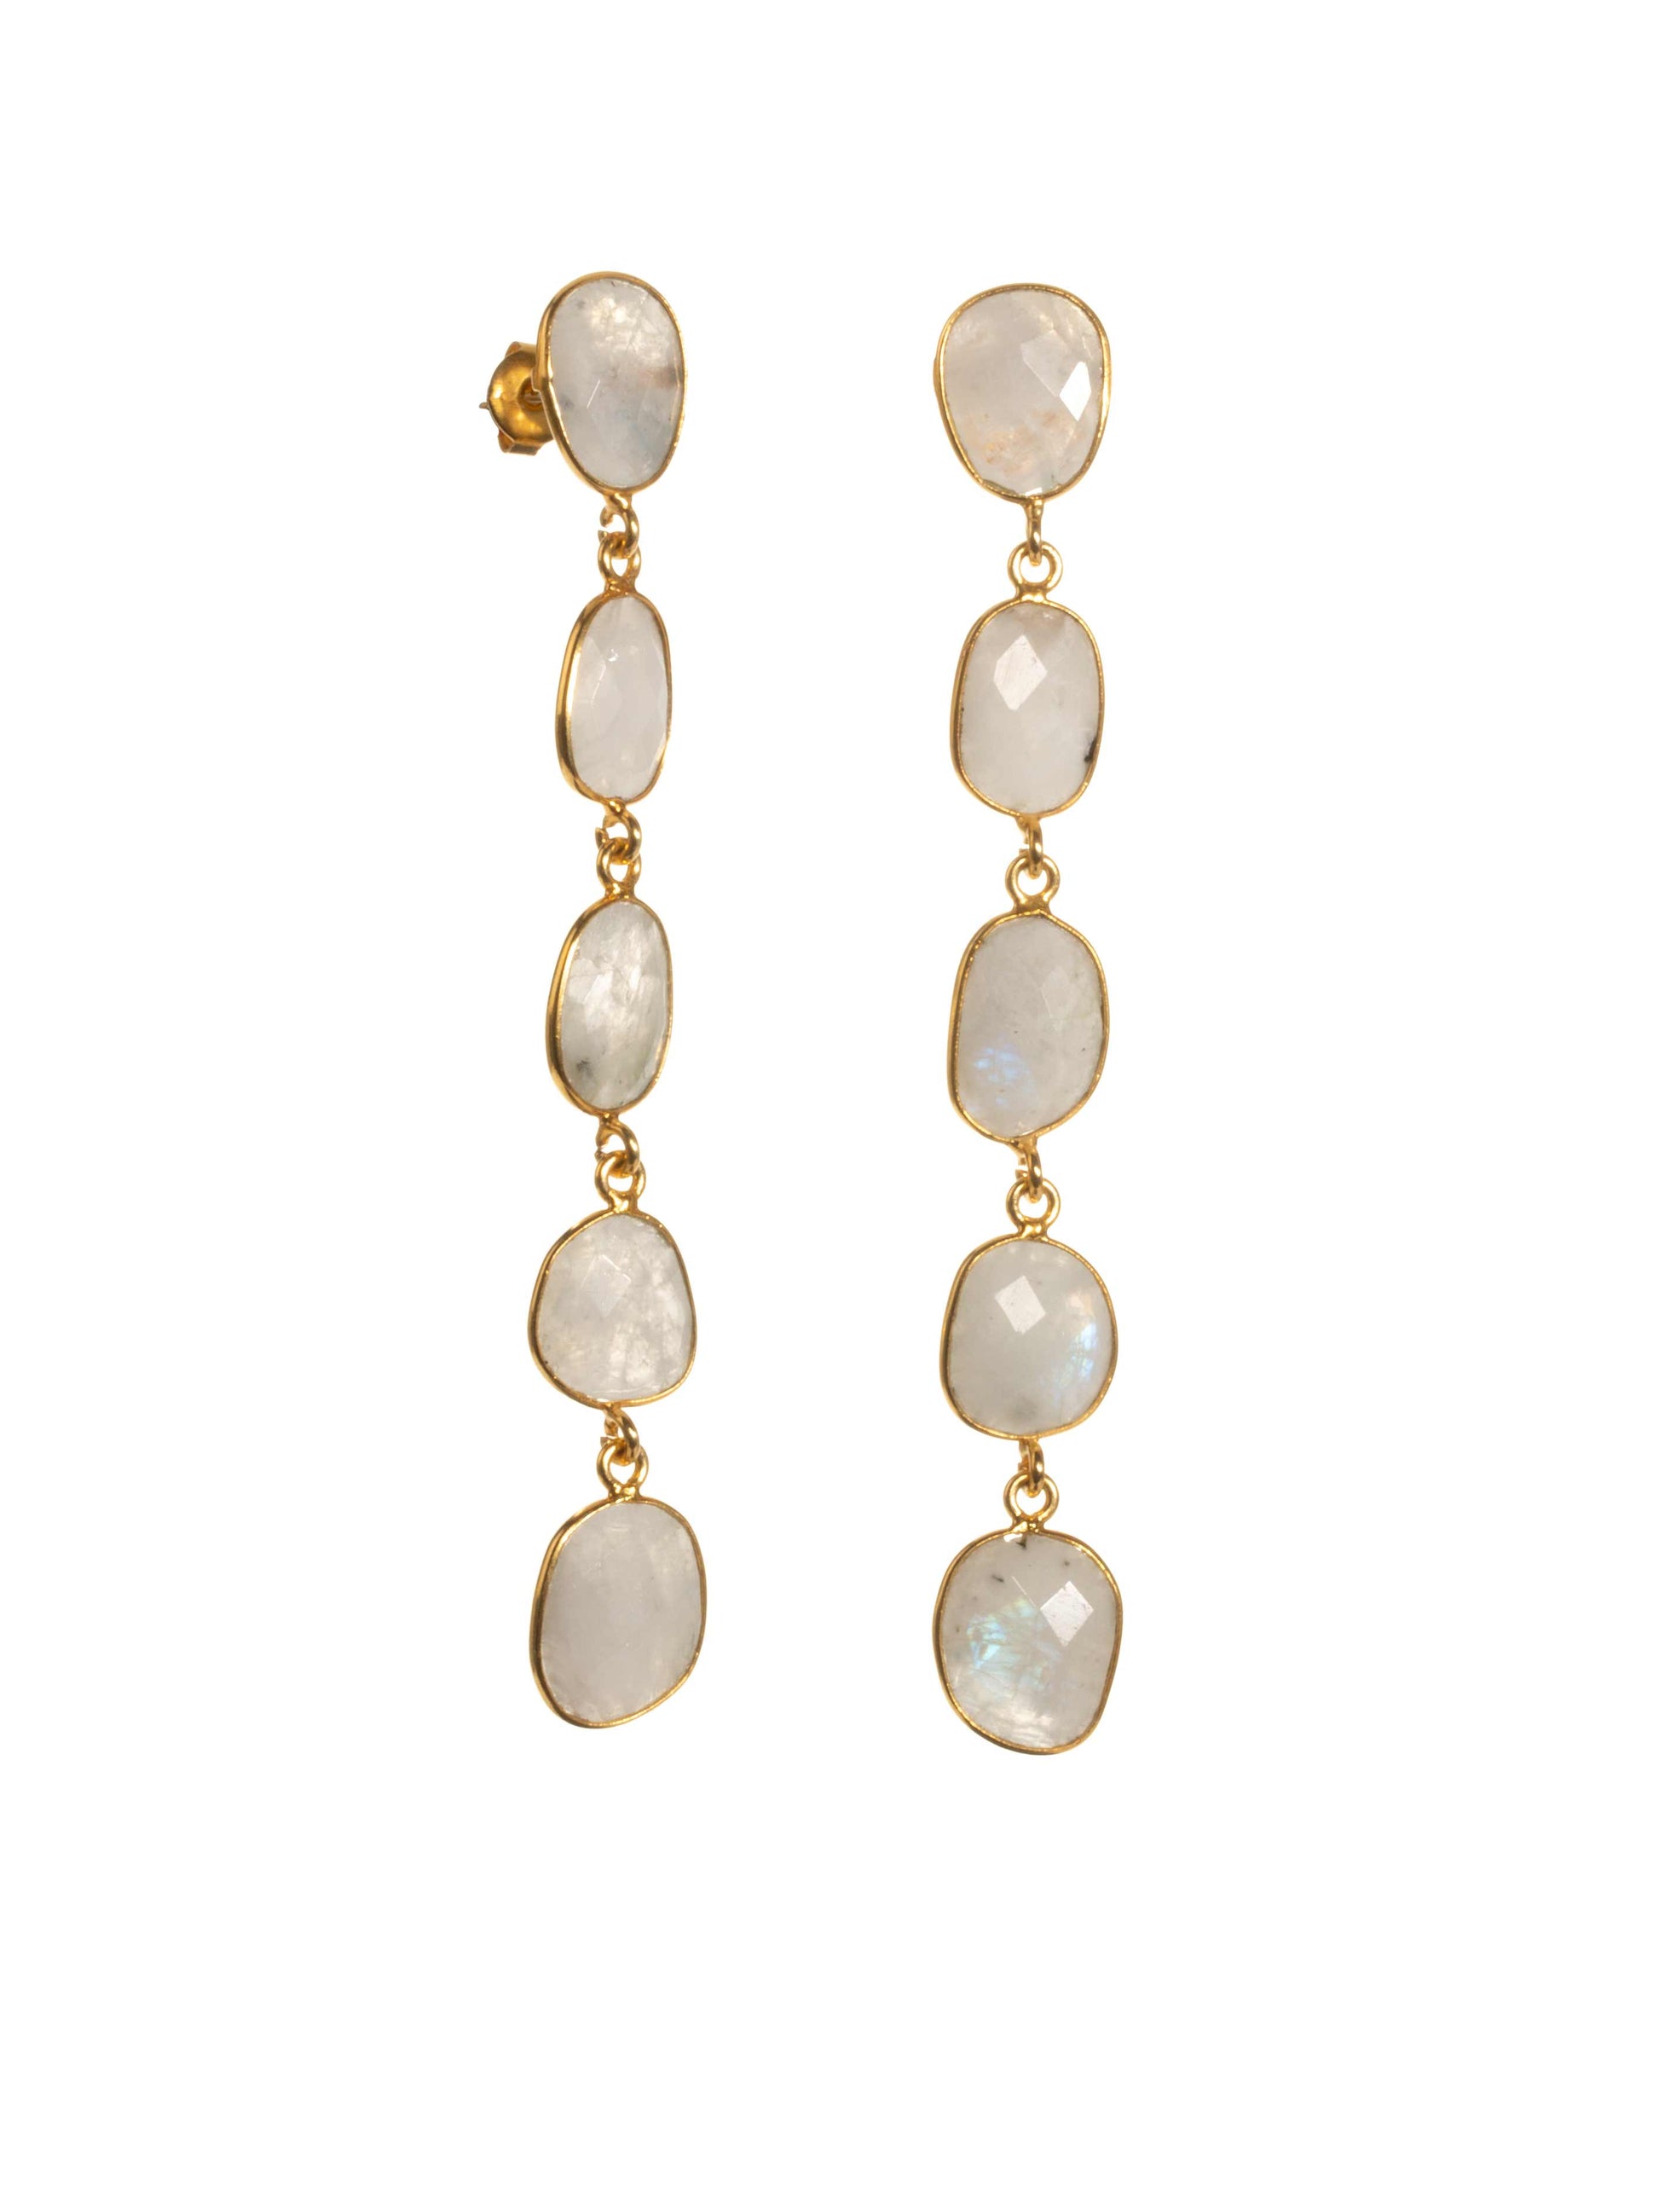 Moonstone earrings in a gold plated six drop stud